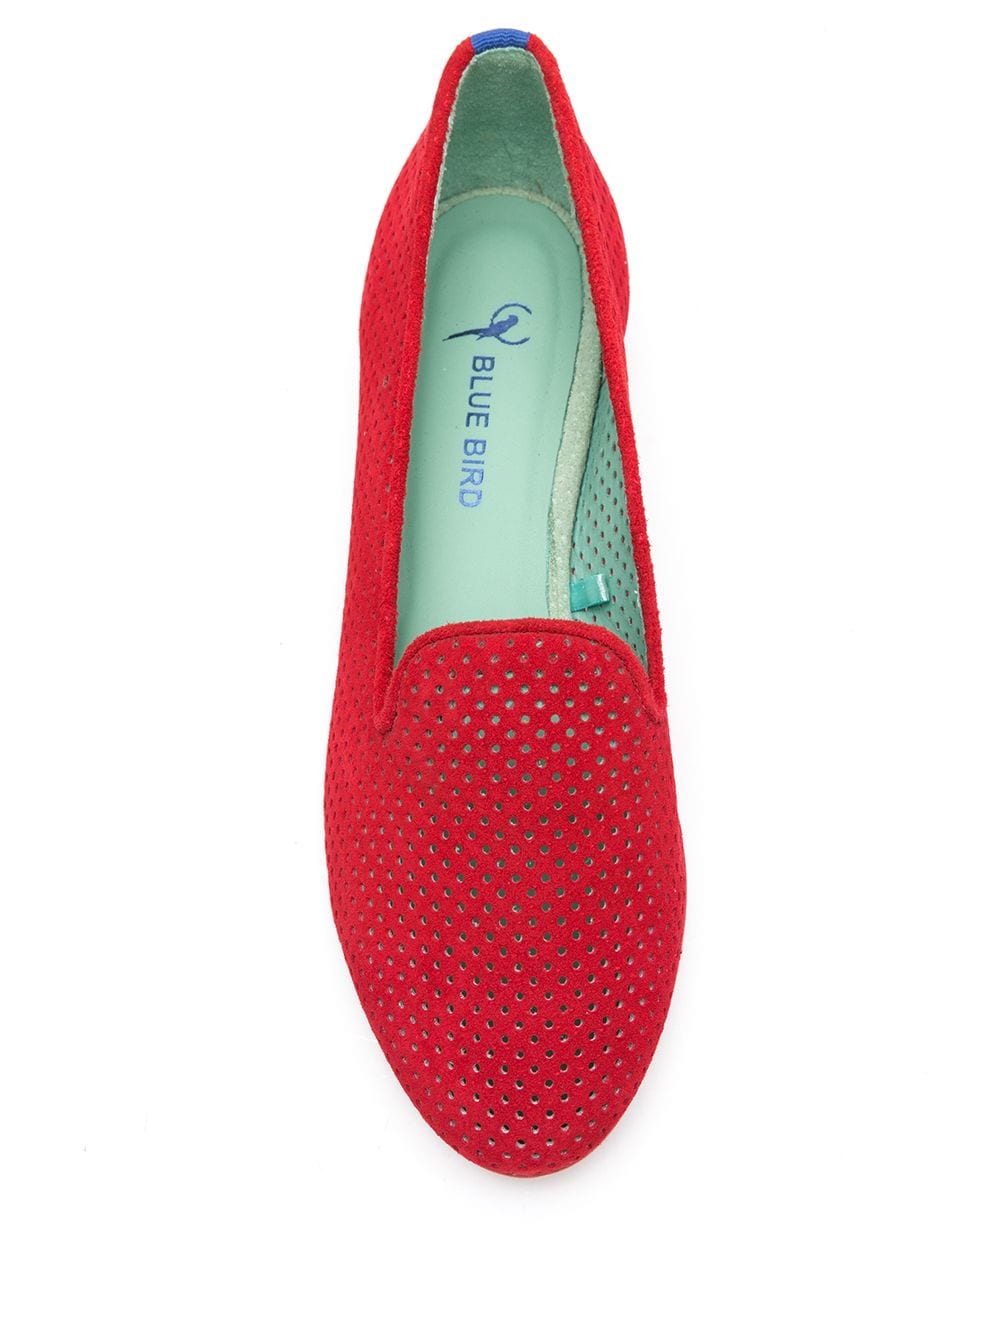 Blue Bird Shoes Perforated Design Loafers - Farfetch